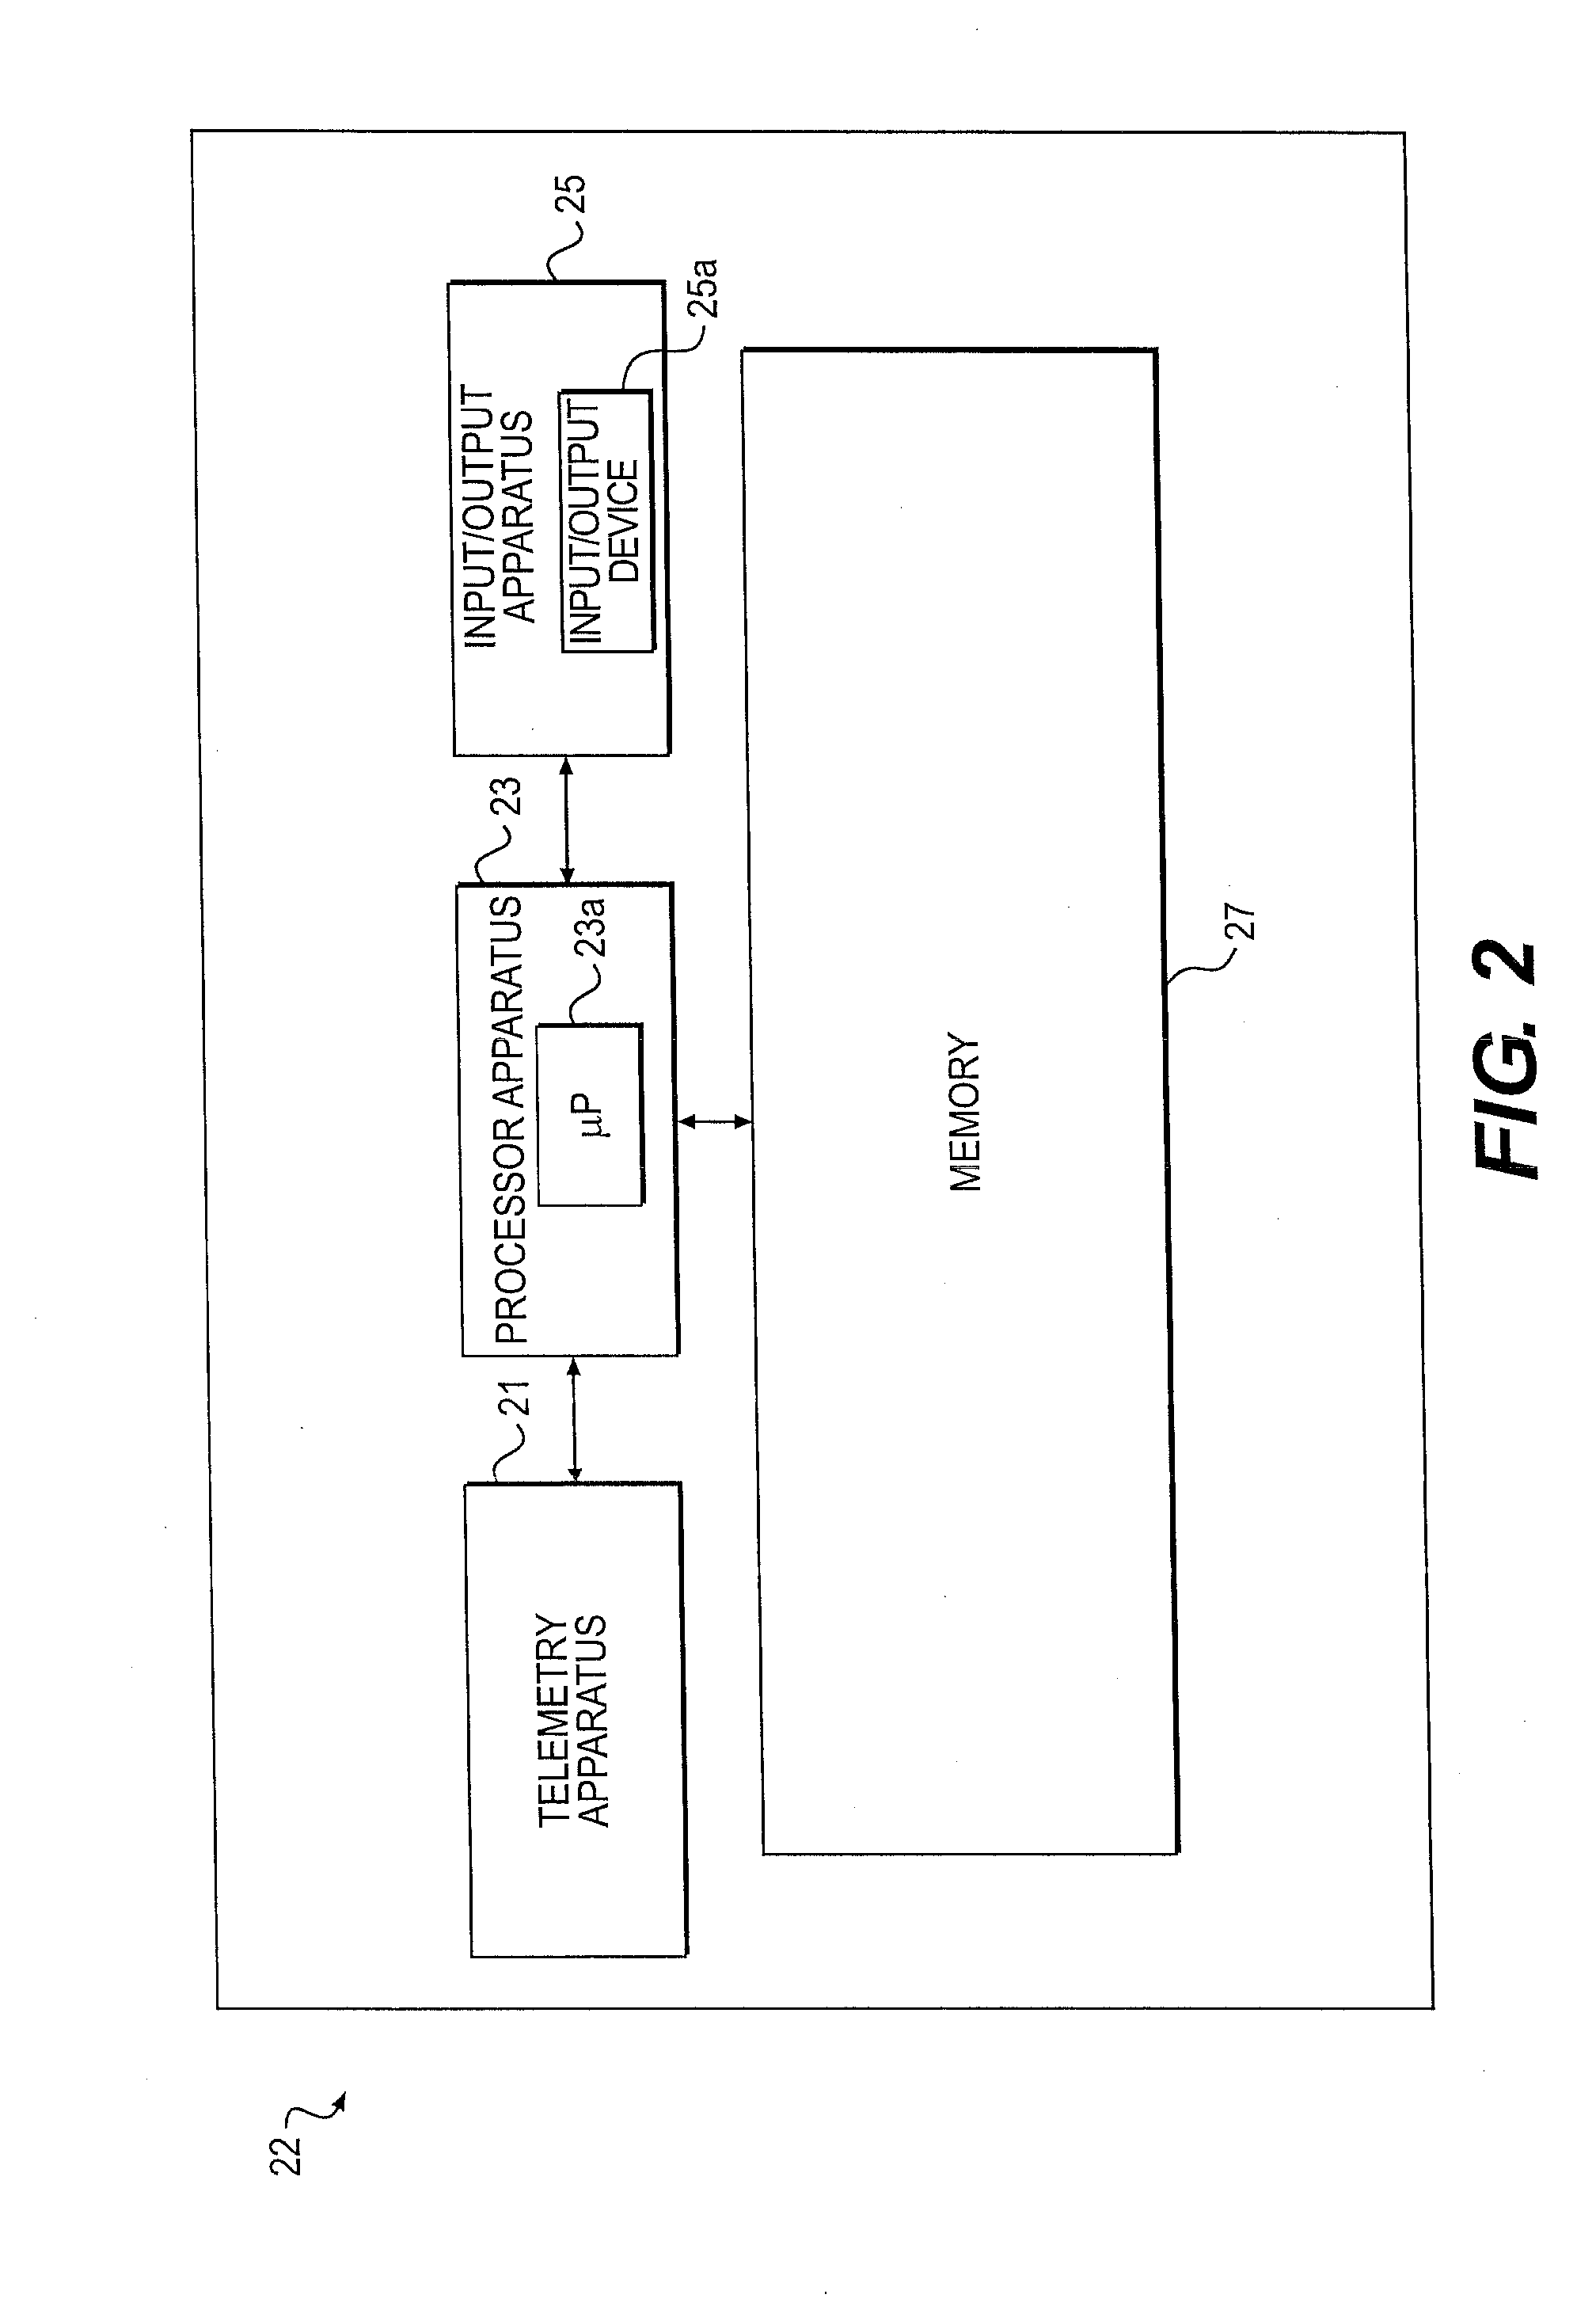 Apparatus for treating pelvic floor disorders and related methods of use